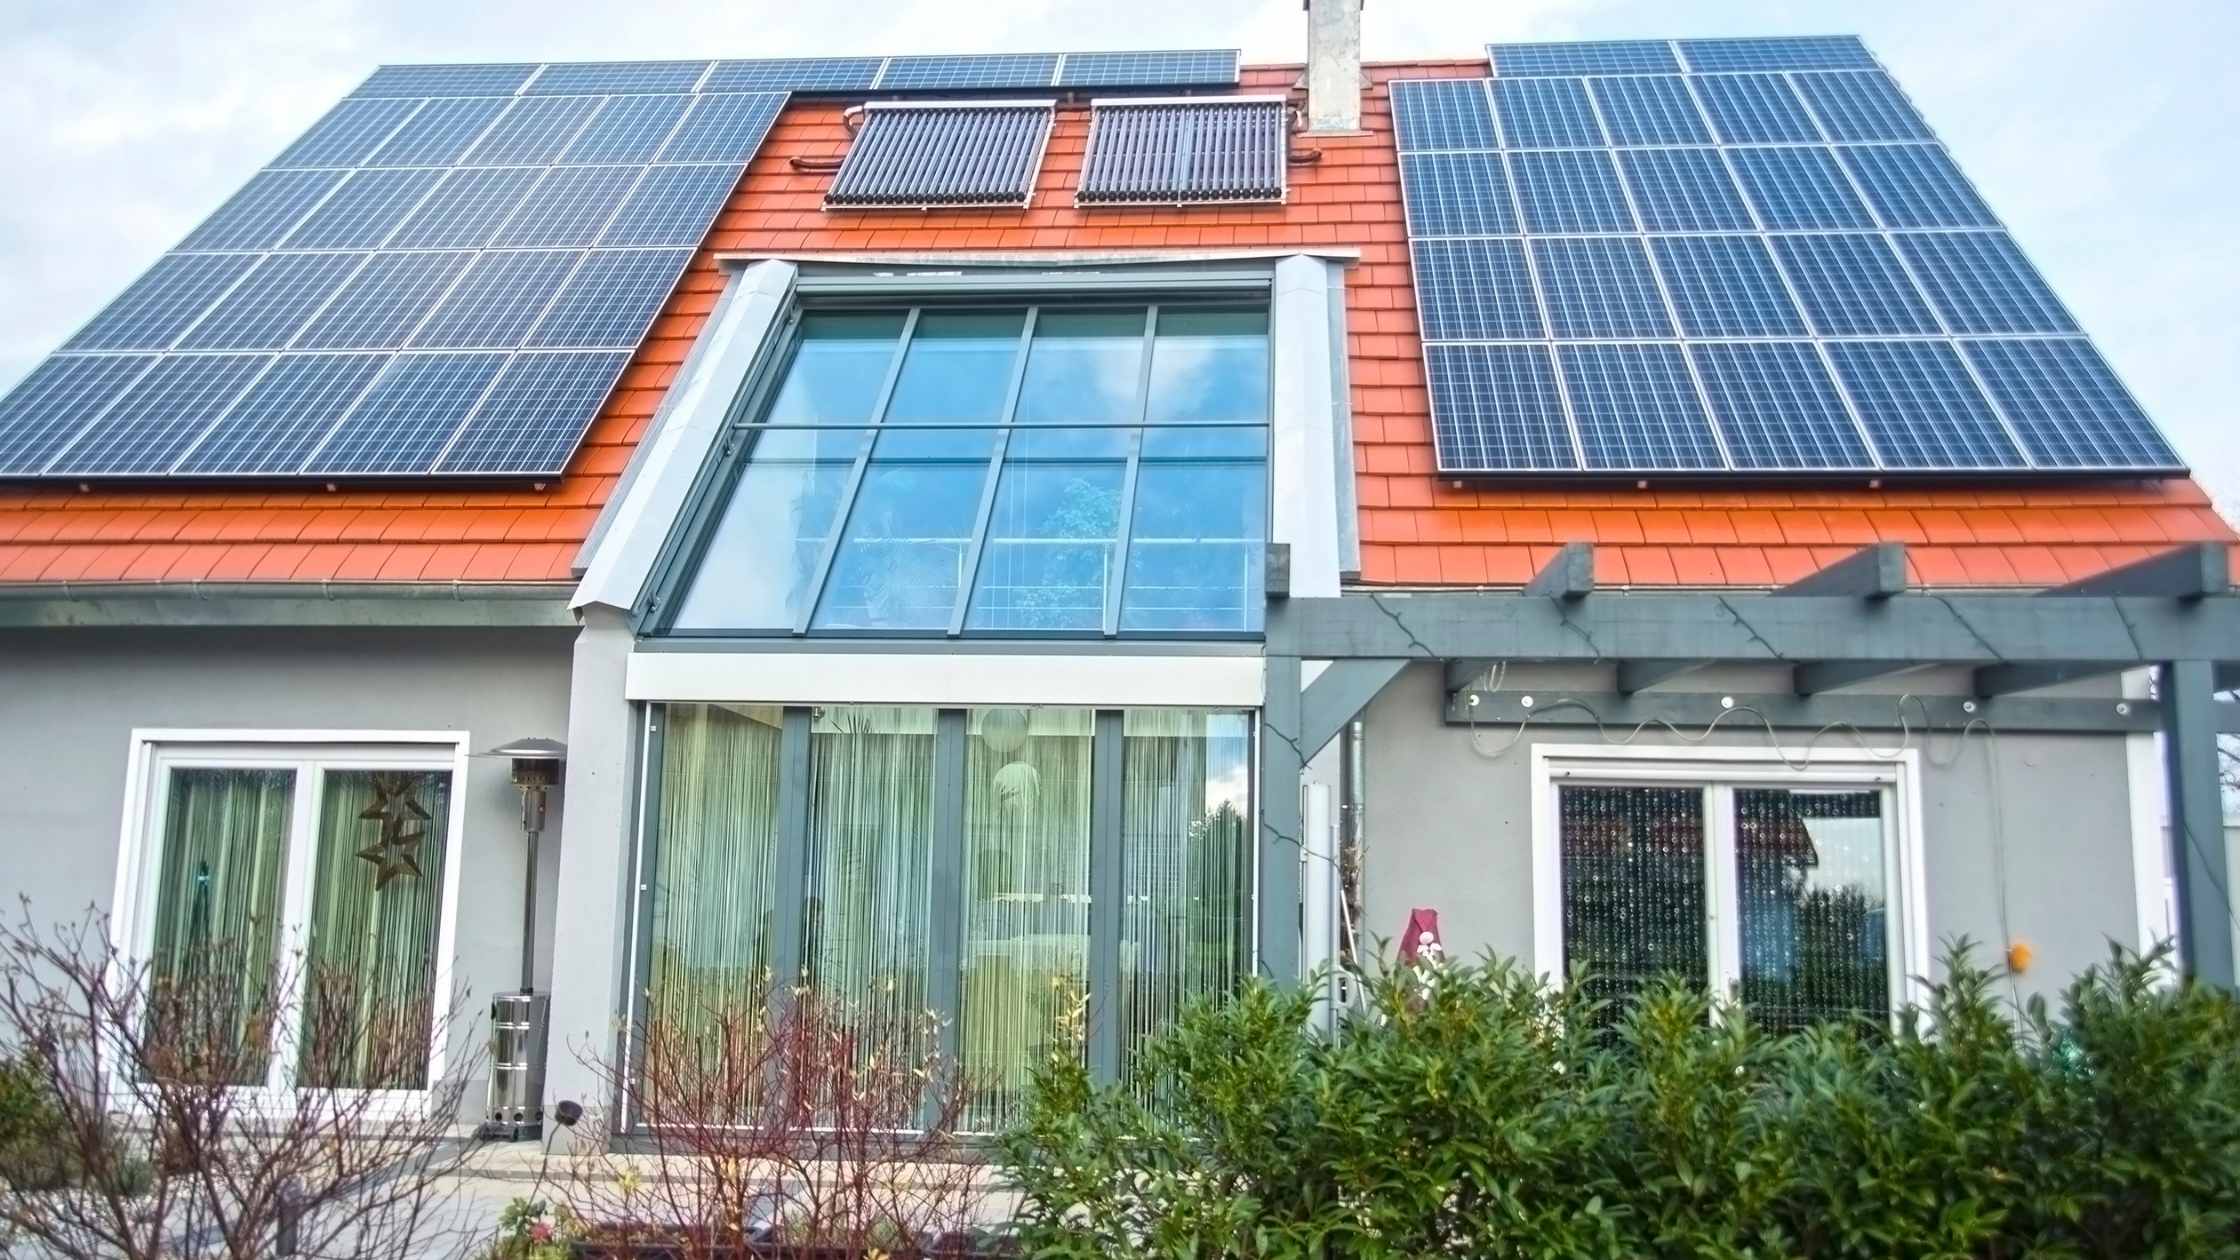 How Expensive Are Solar Panels For A Home